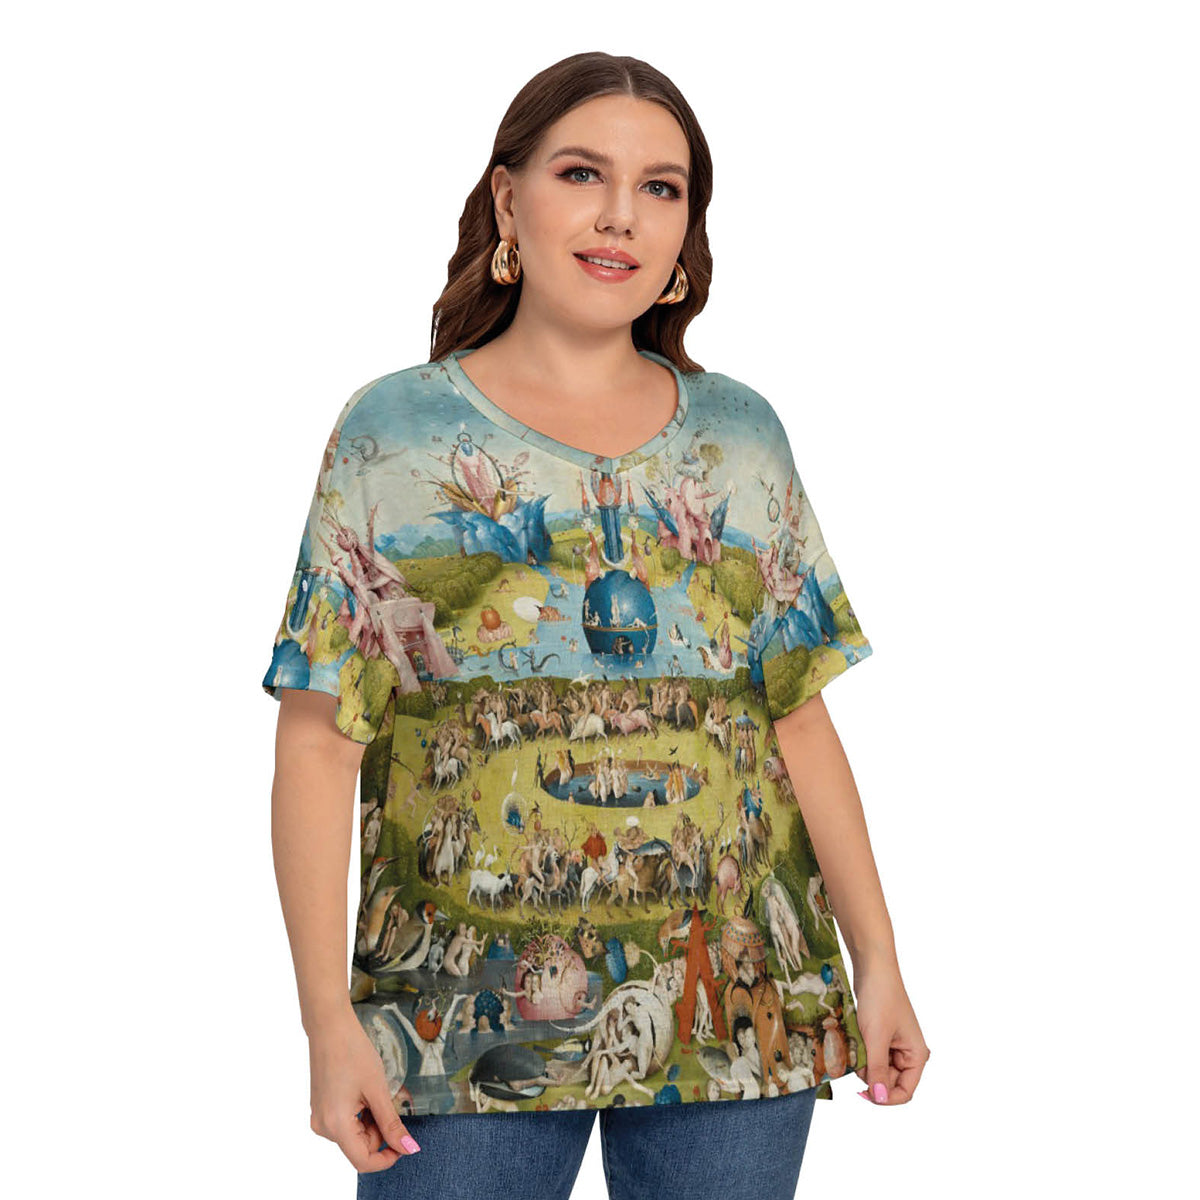 Hieronymus Bosch Garden of Earthly Delights T-shirt